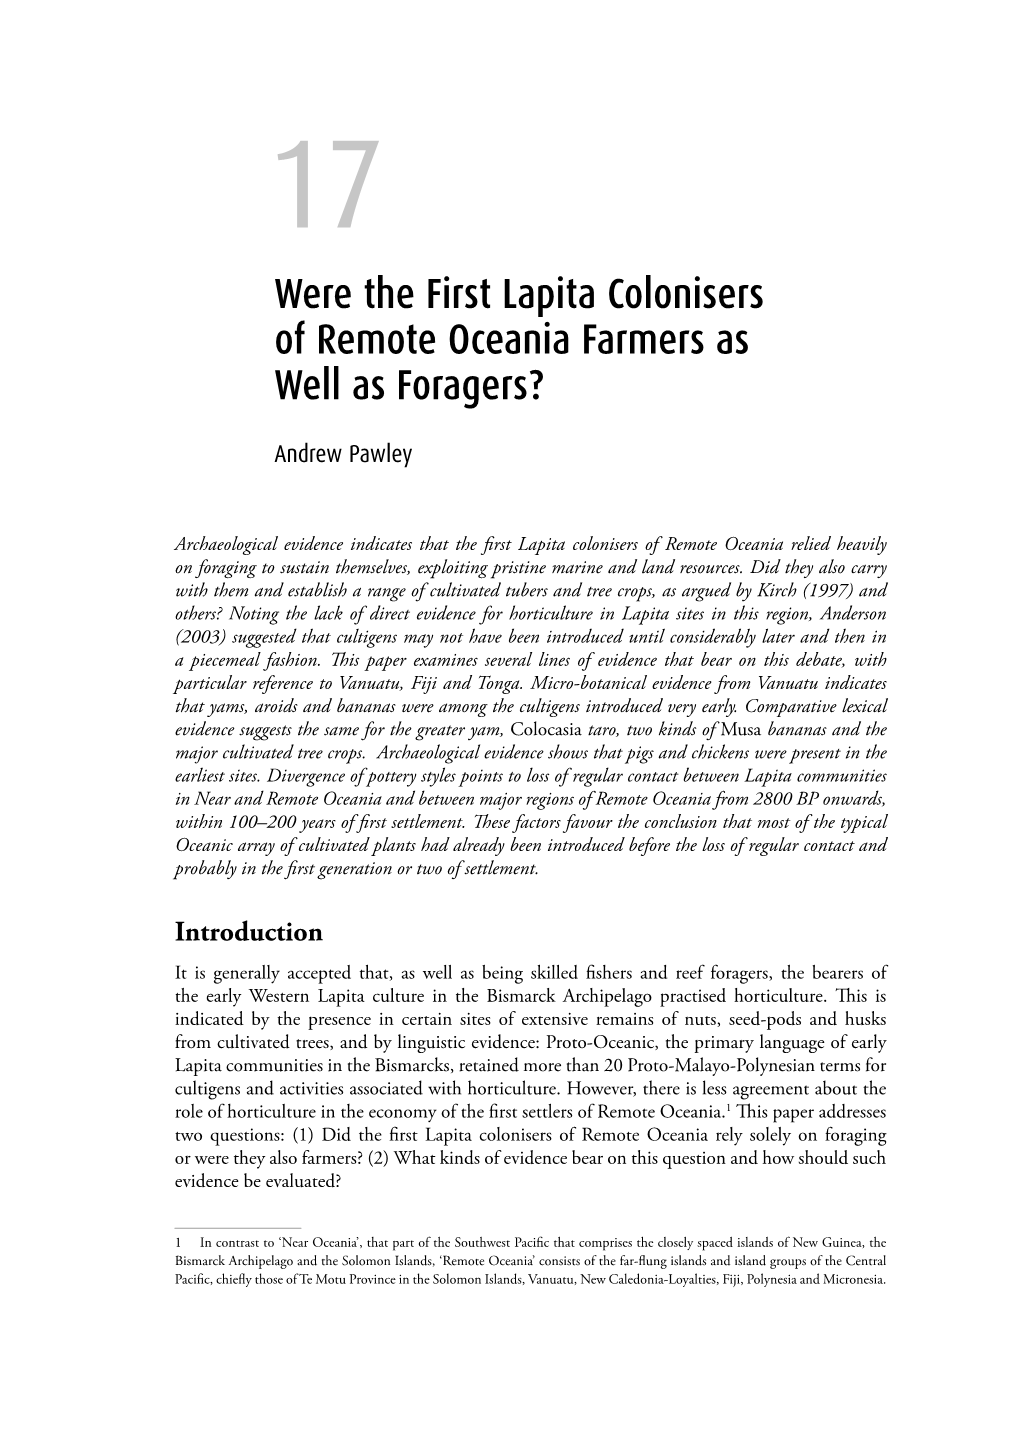 Were the First Lapita Colonisers of Remote Oceania Farmers As Well As Foragers?